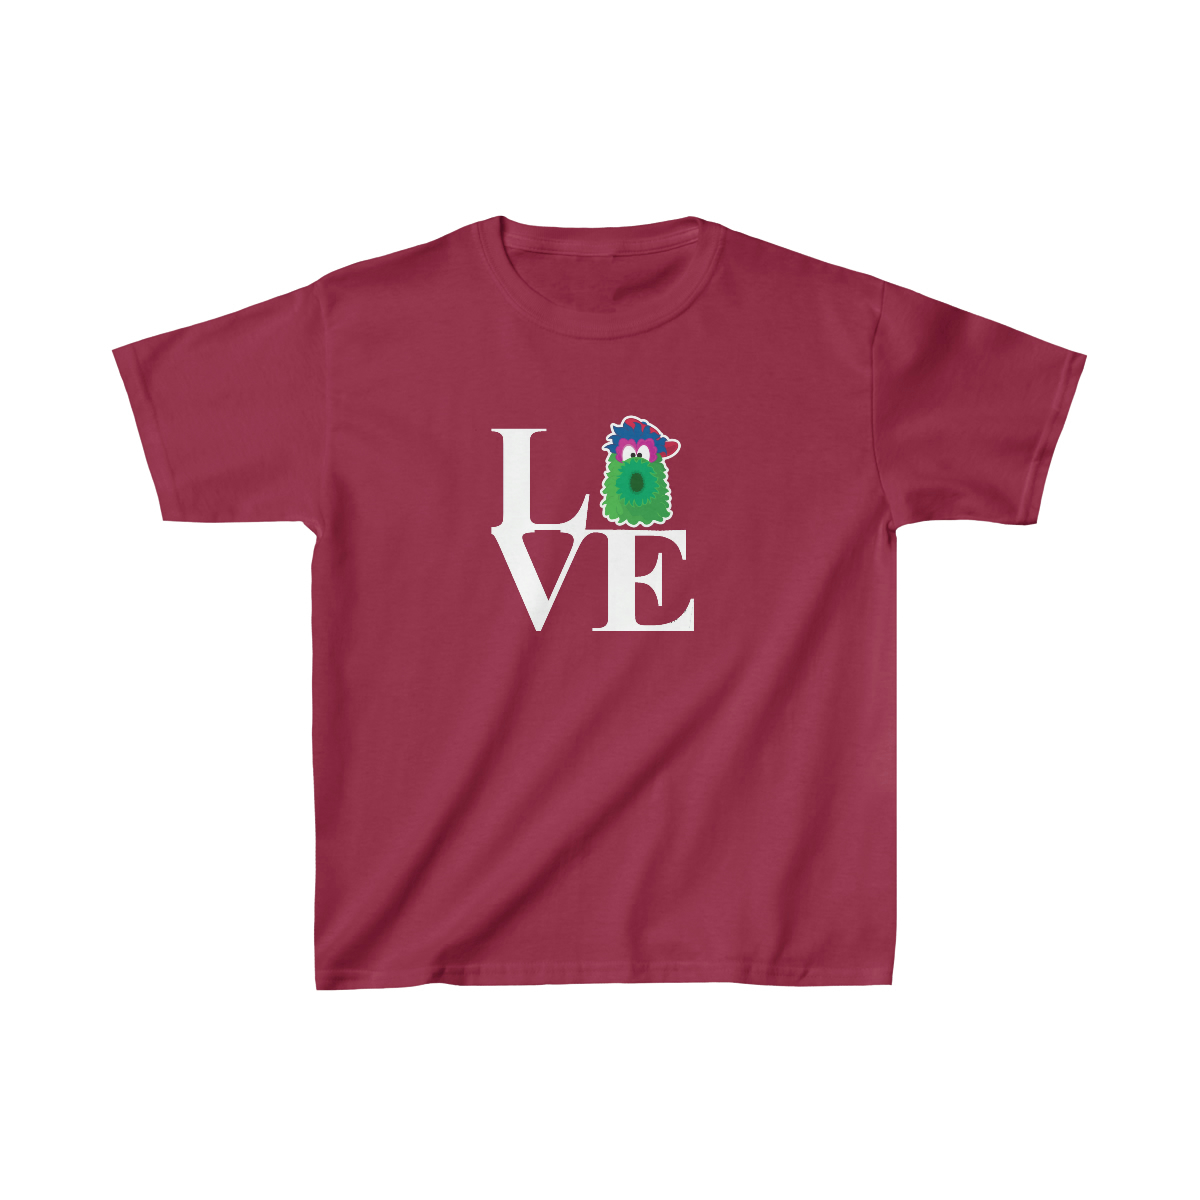 Phillies Logo Infant Shirts - Section 419